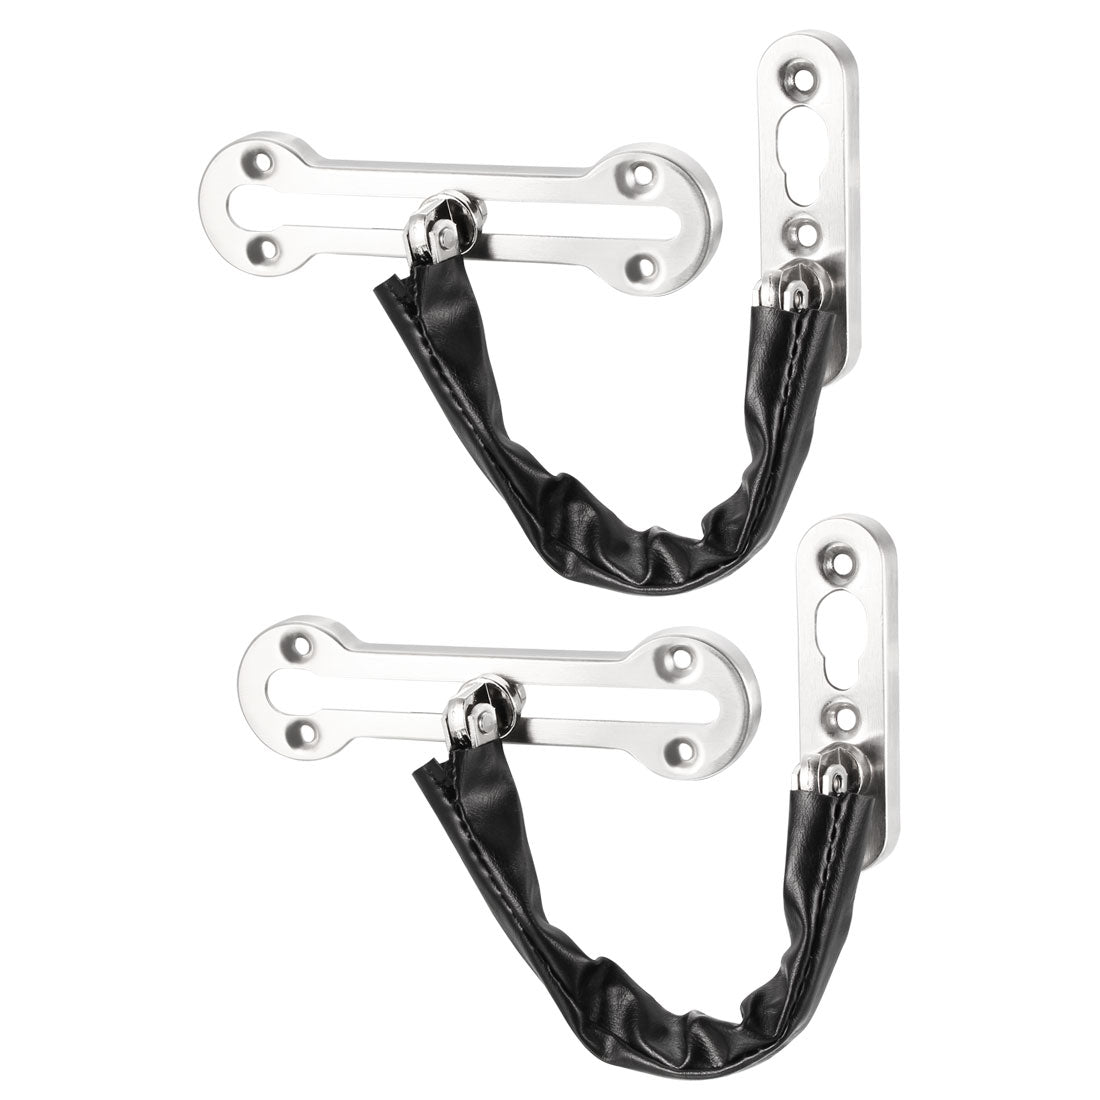 uxcell Uxcell Door Lock Chain with Screws Stainless Steel Chain Lock for Door and Home Security, 2pcs